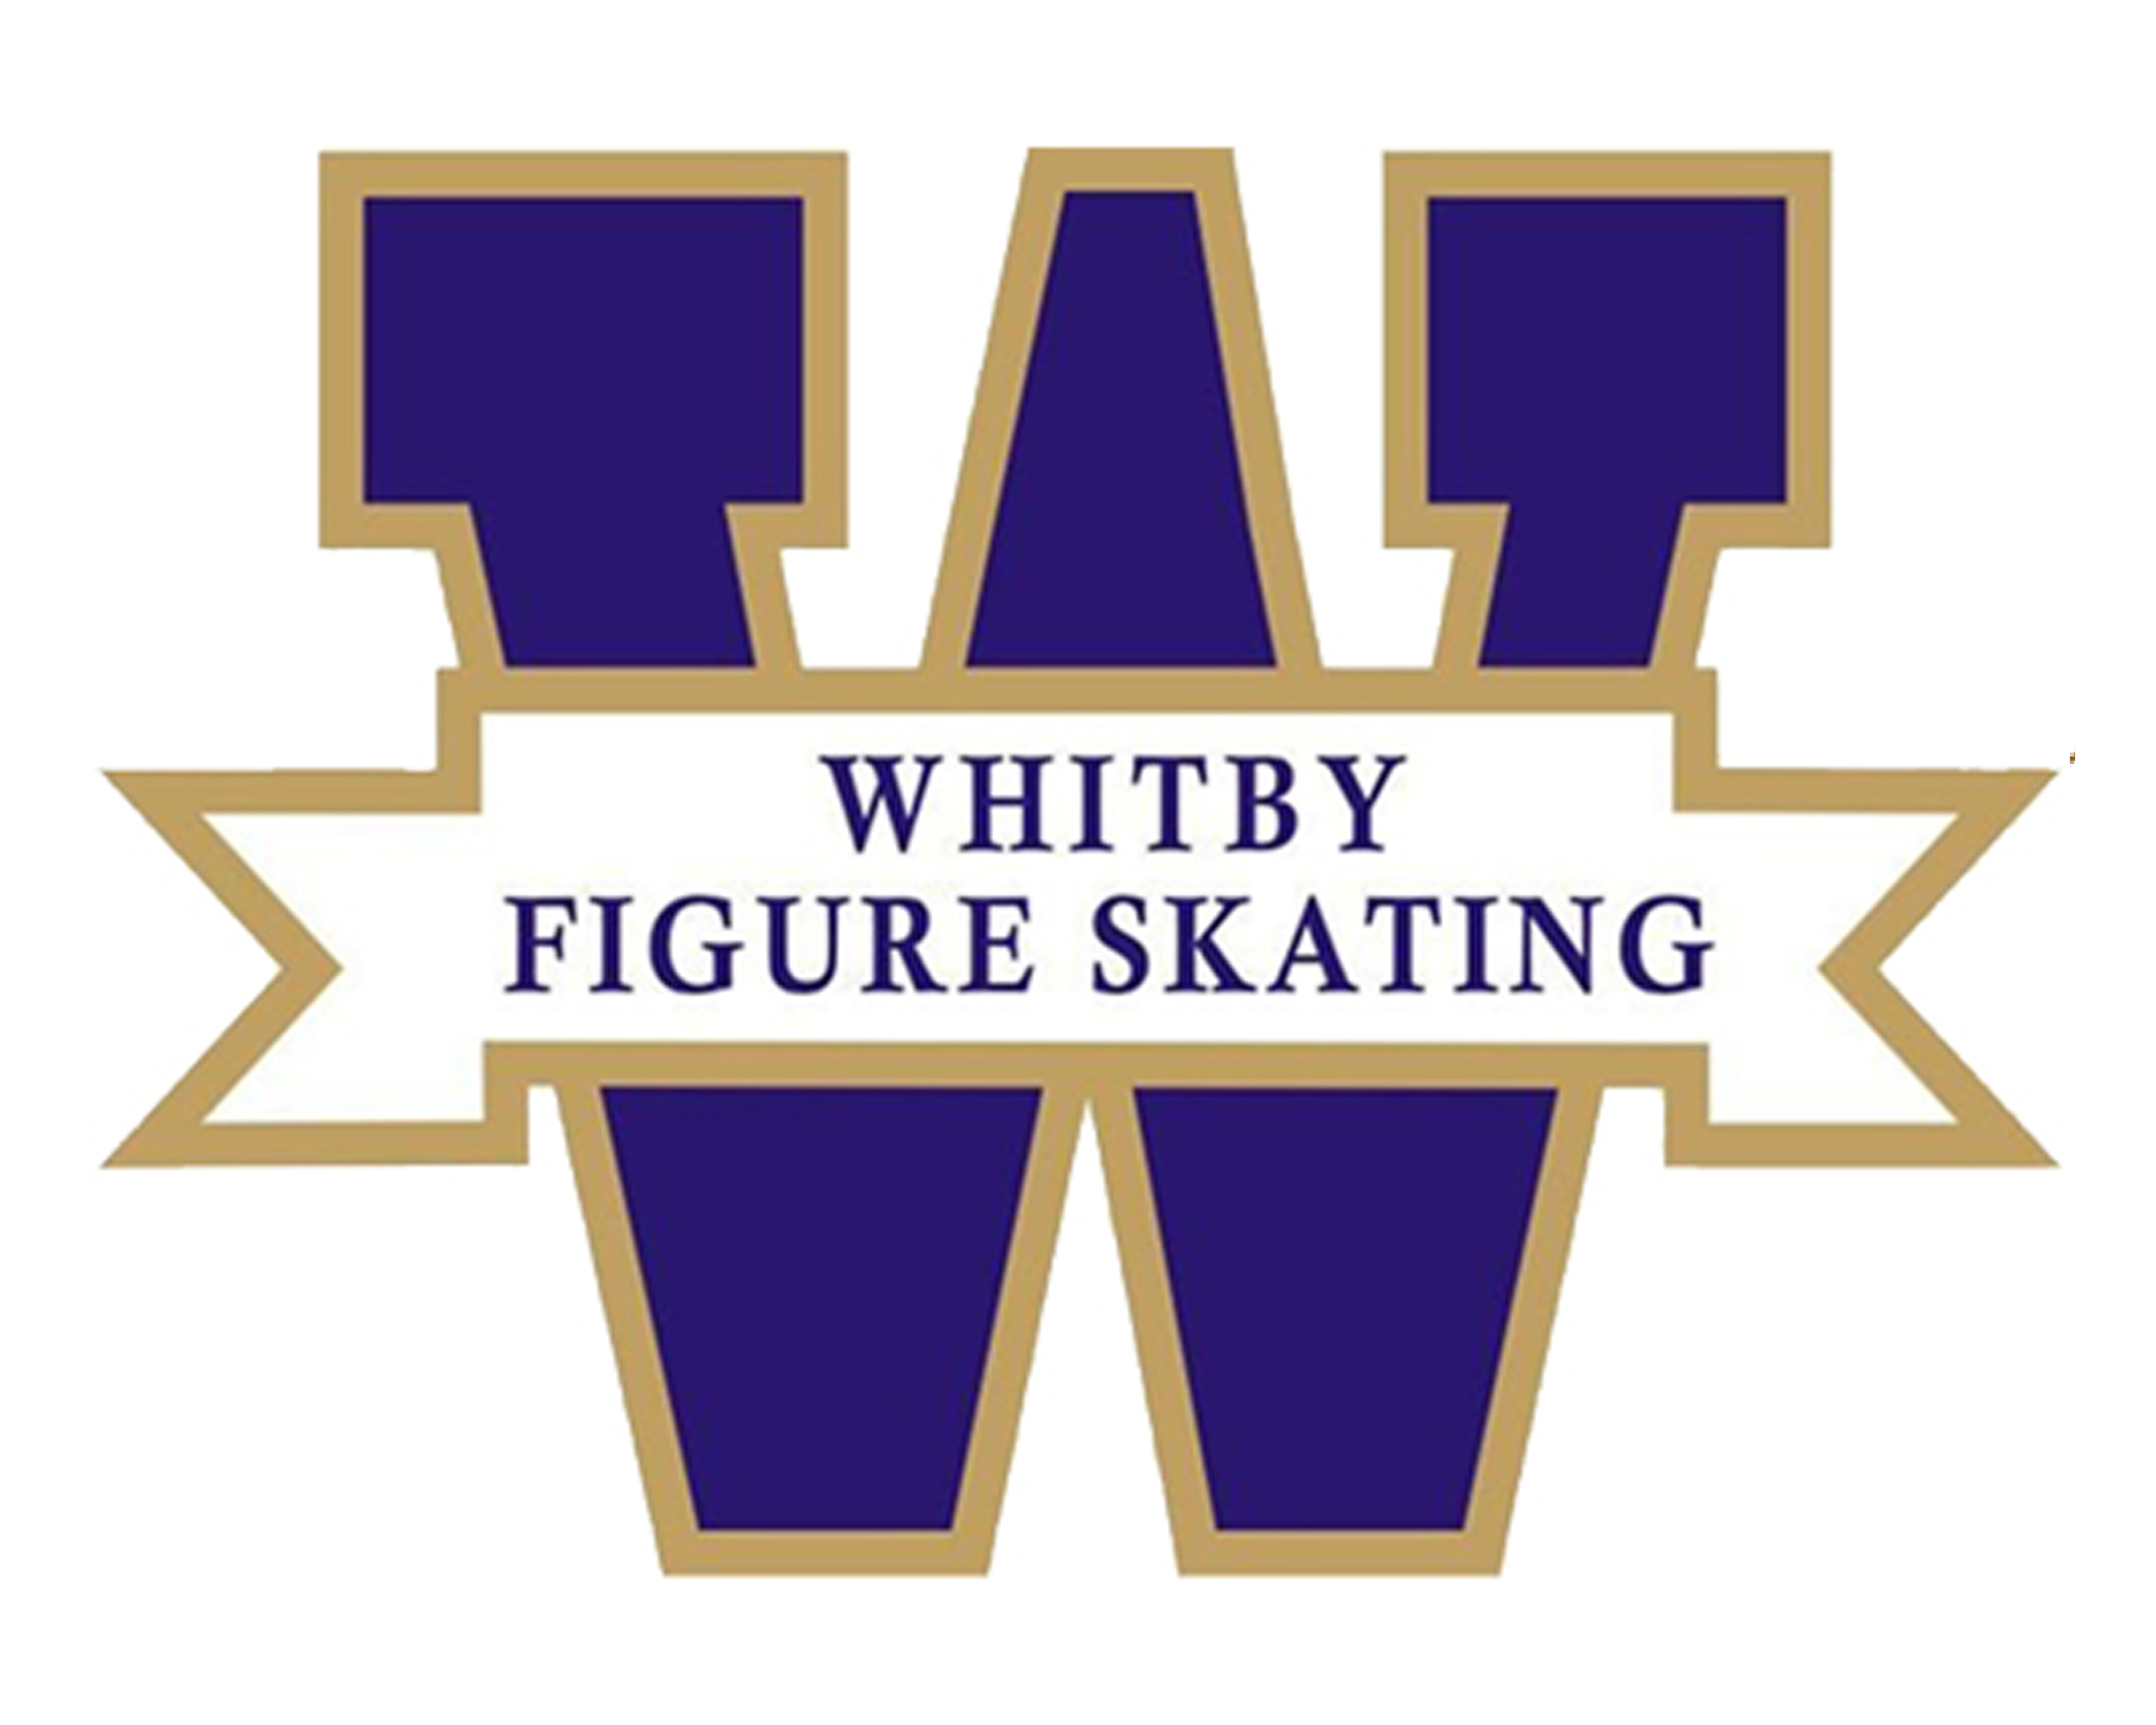 Whitby Figure Skating Club